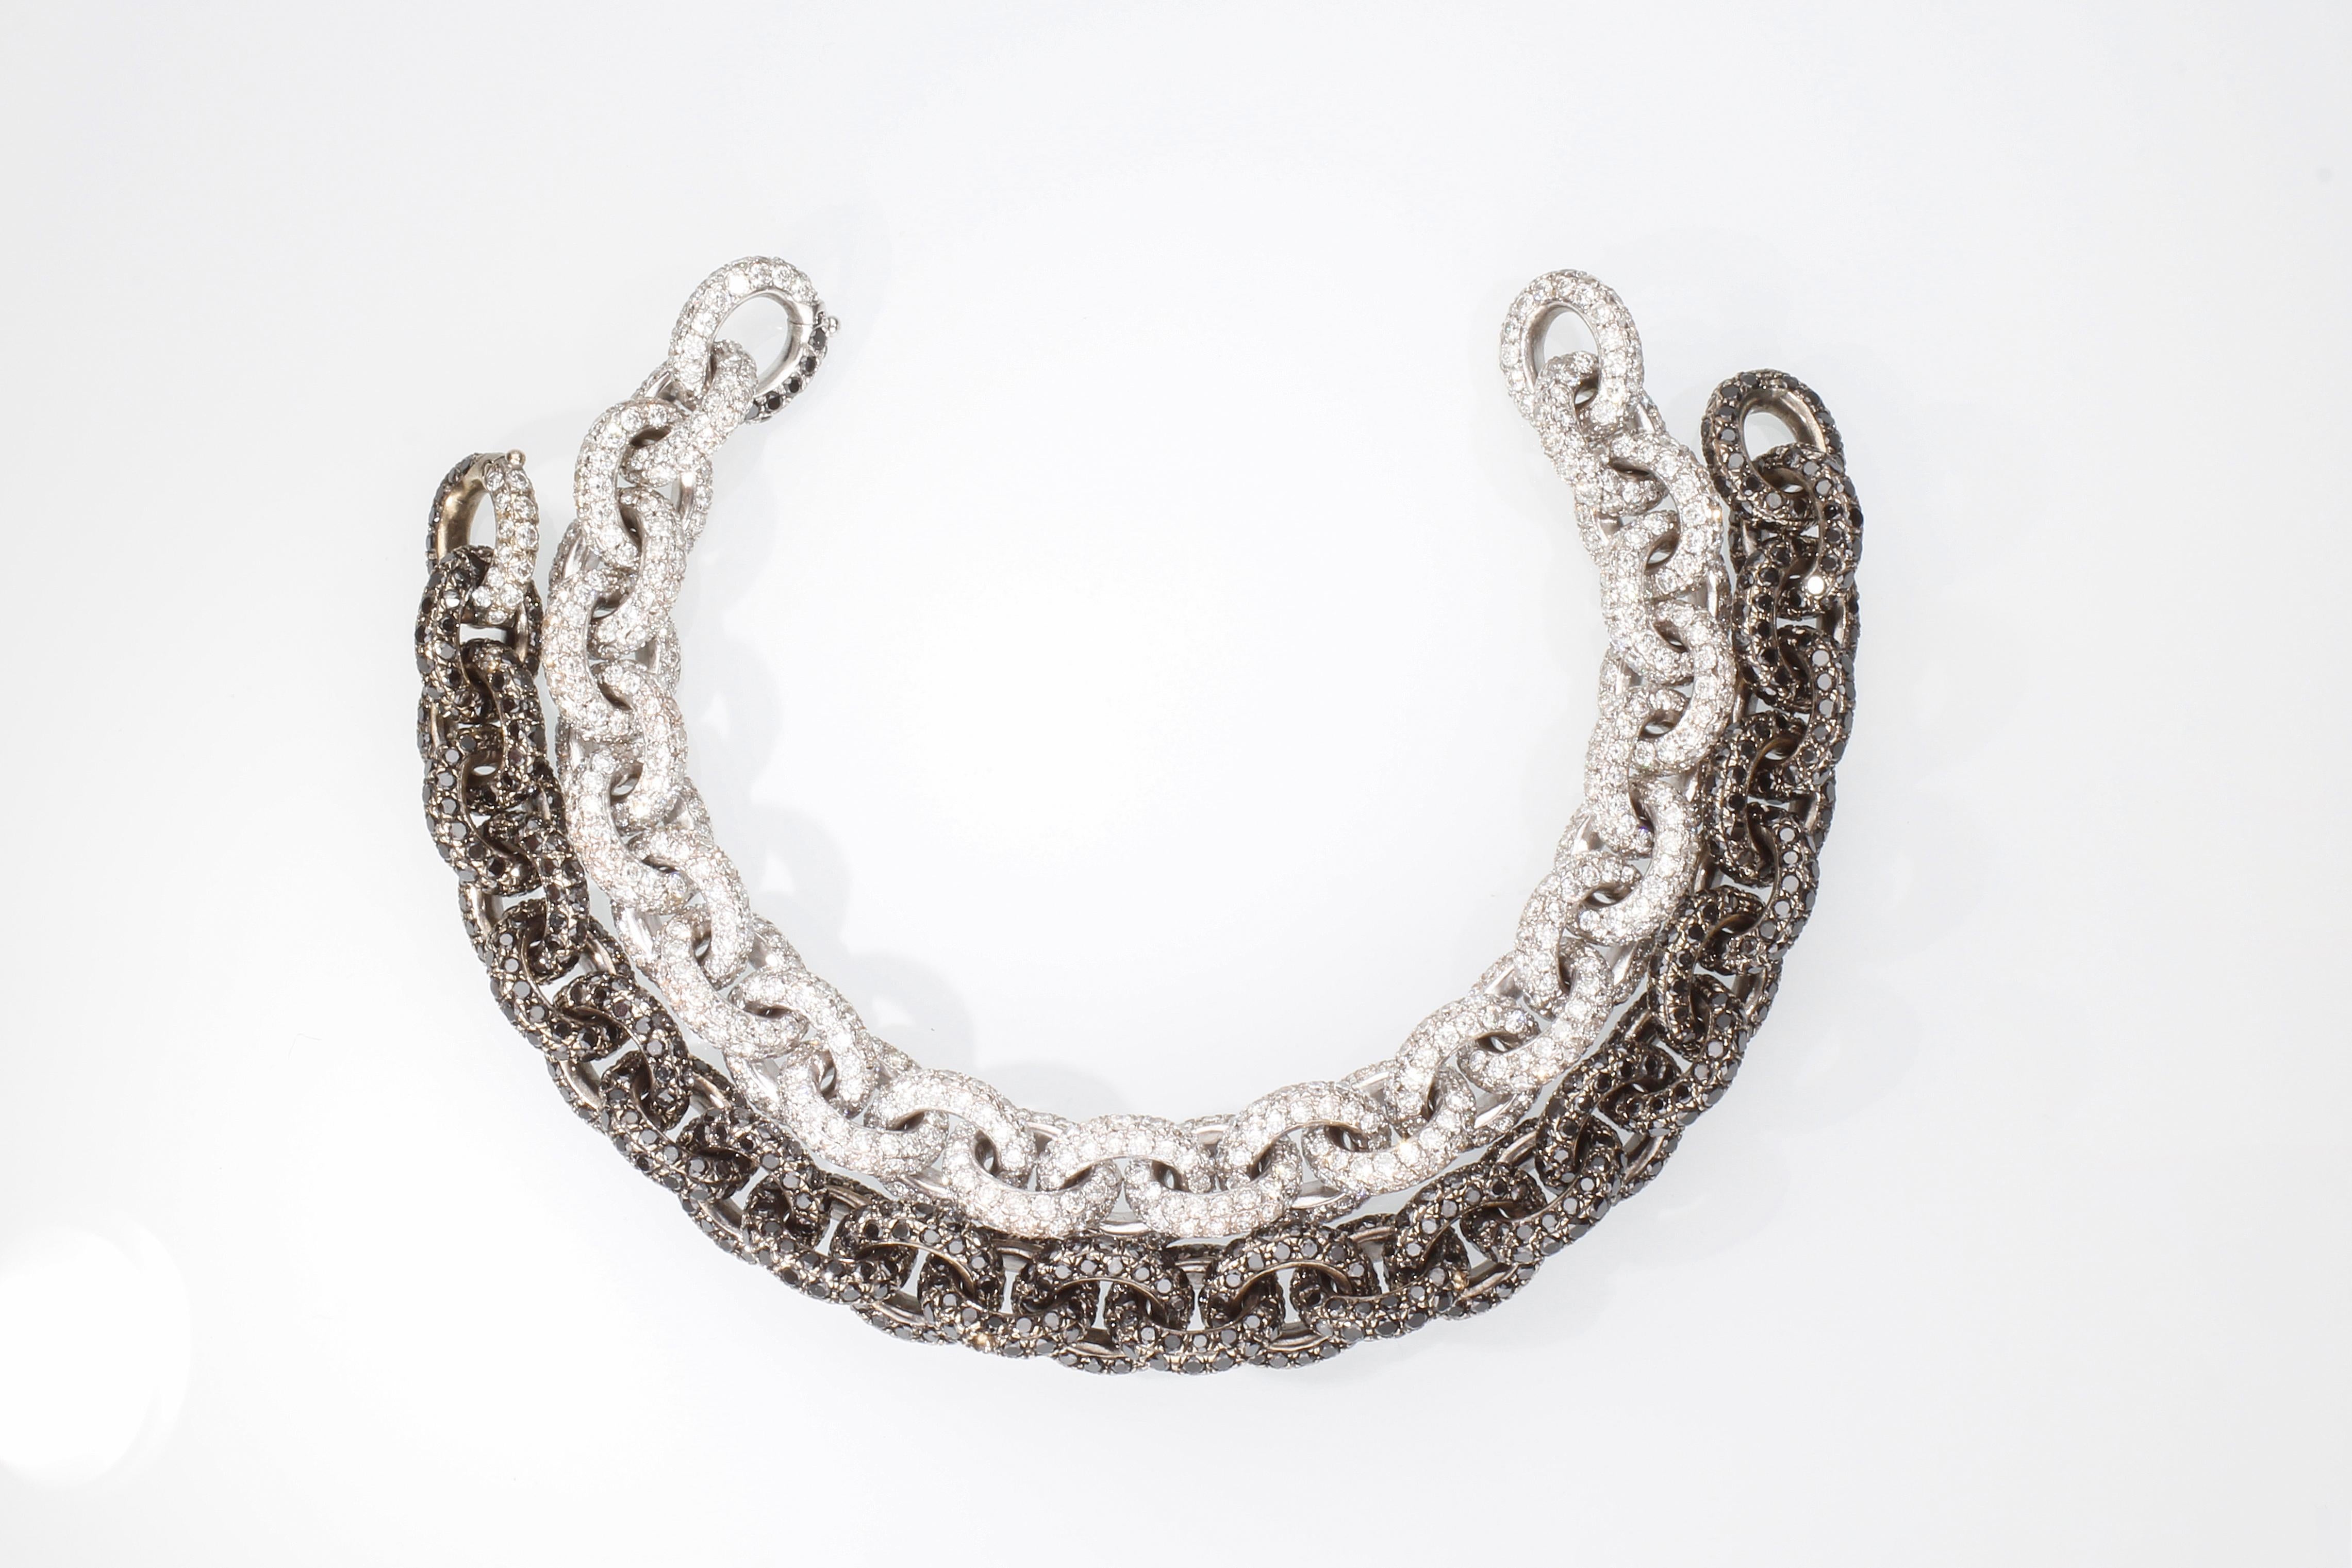 Chain Necklace/Bracelet with 64.26 Ct of White and Black Diamonds. Handmade. For Sale 10